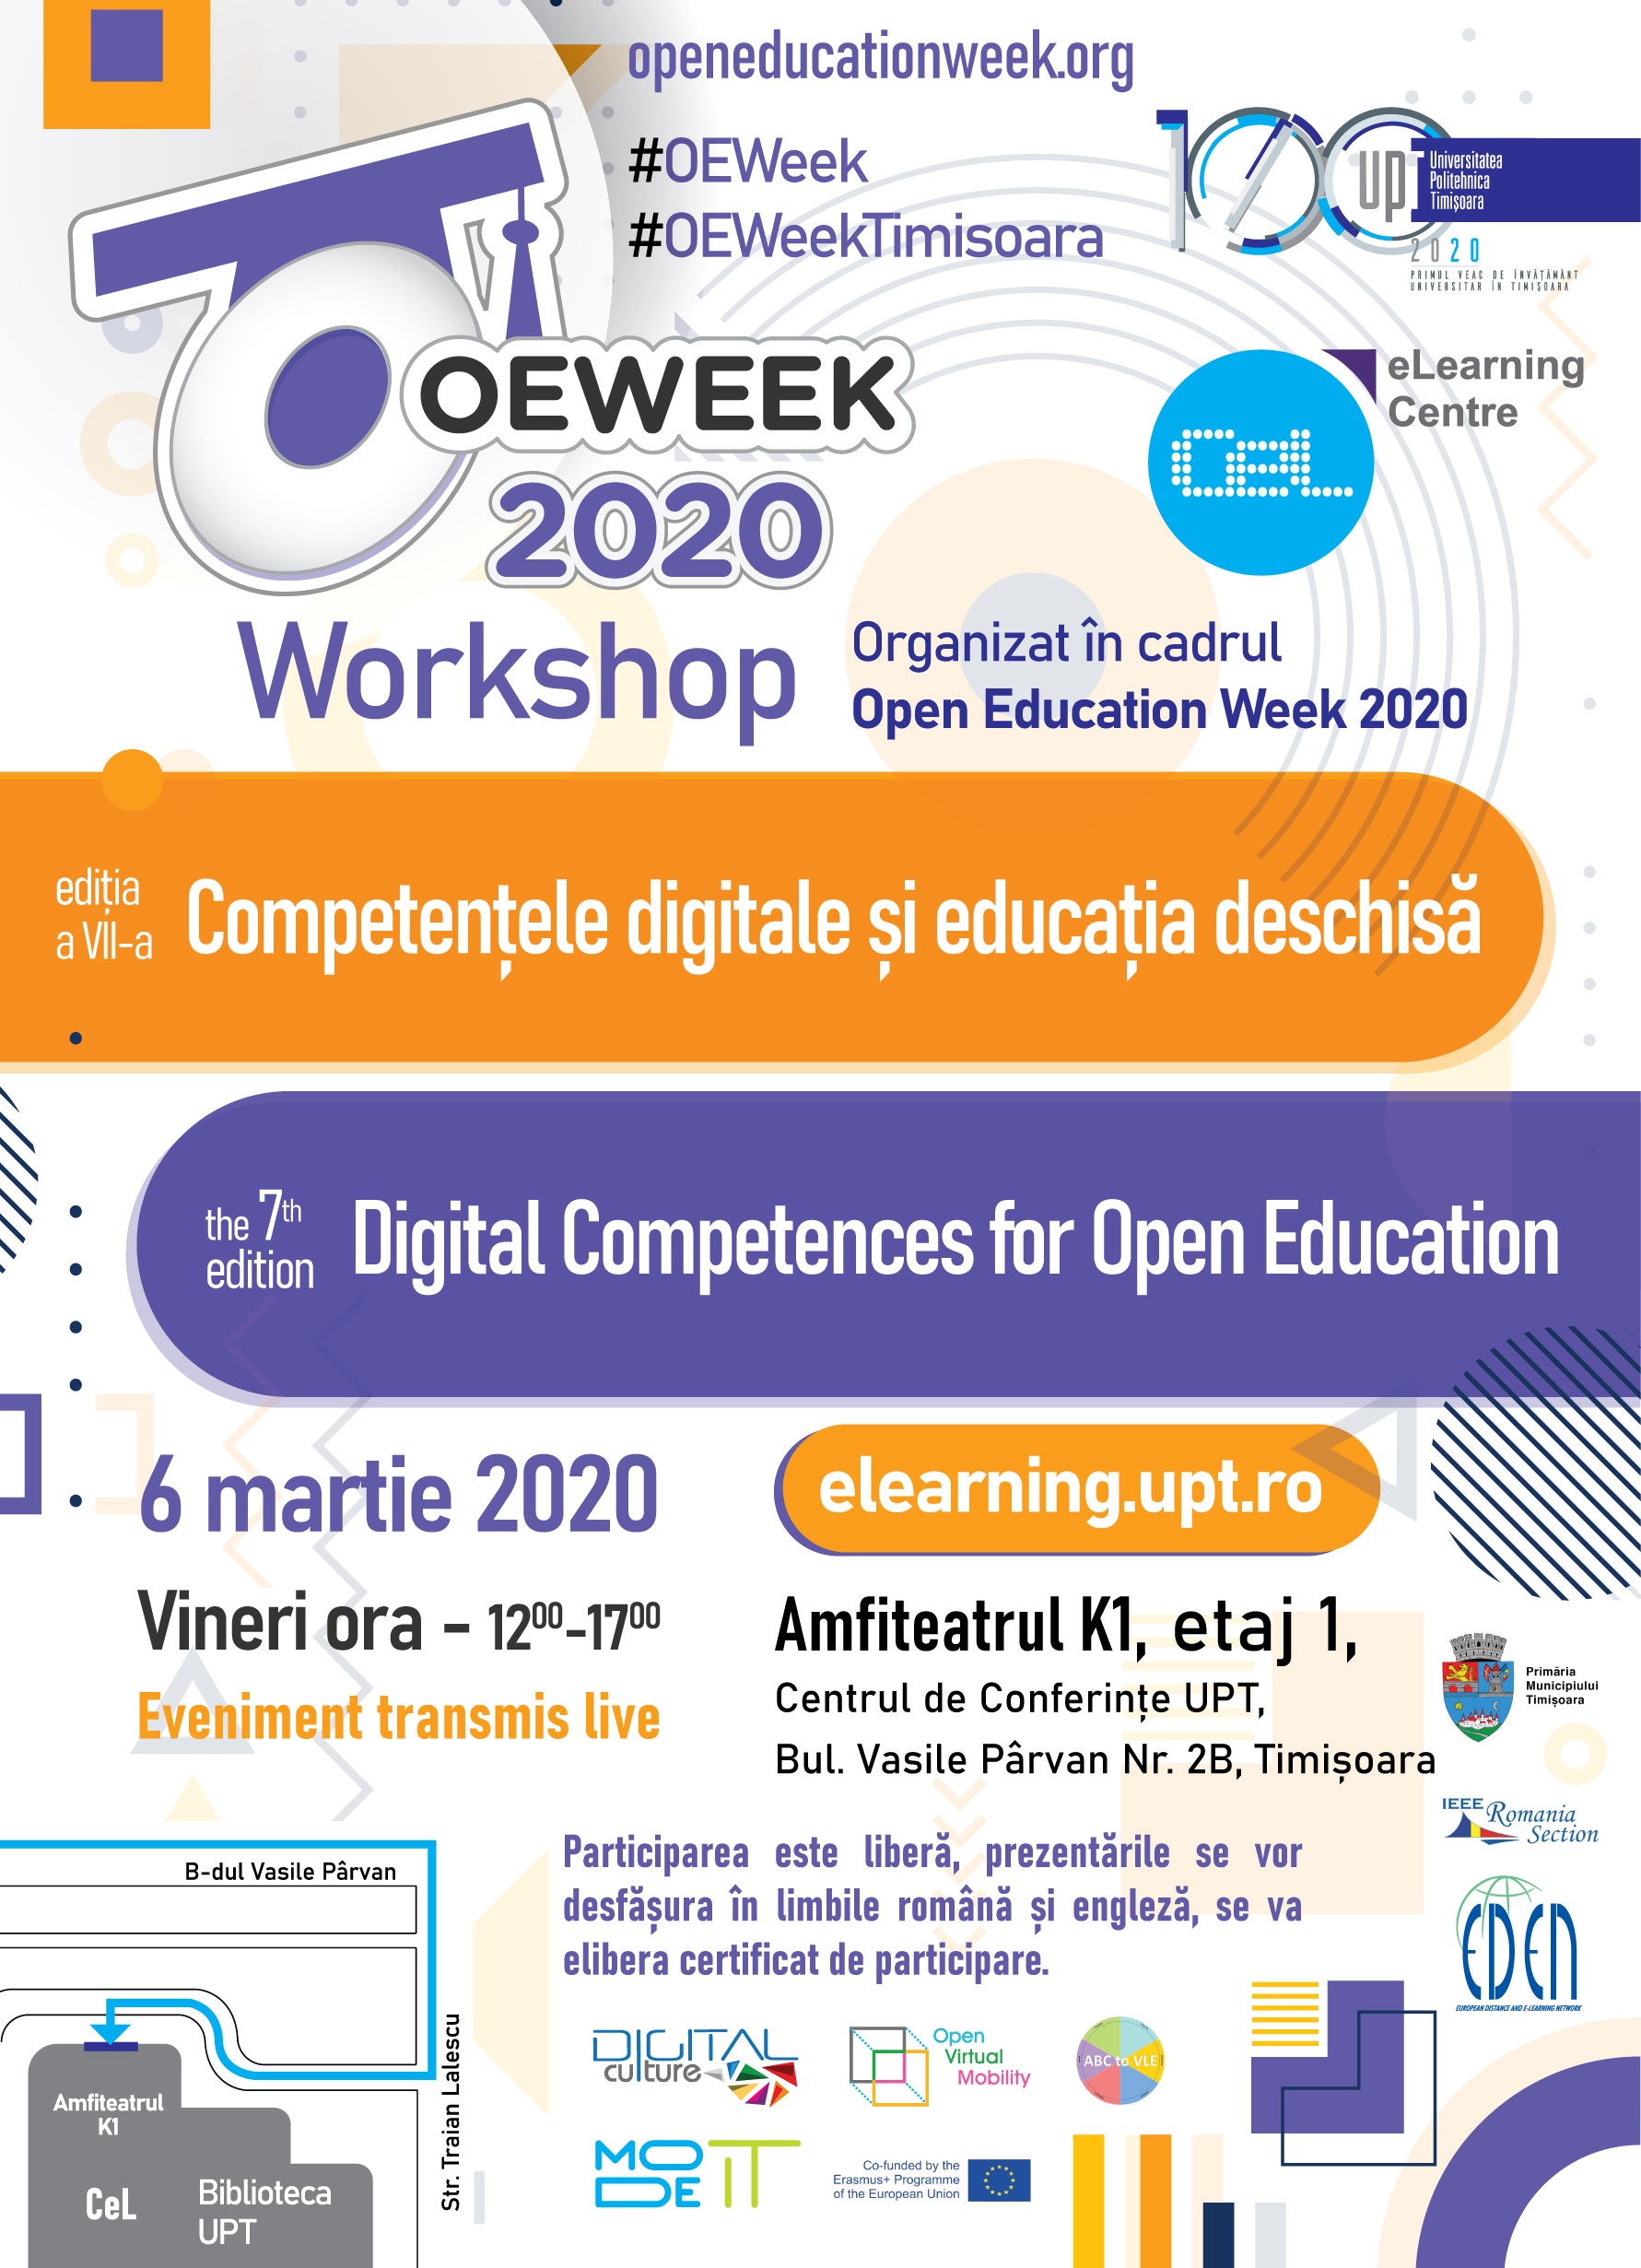 Closing of the 7th edition of the Digital Skills and Open Education Workshop - the benefits of digital skills and open resources